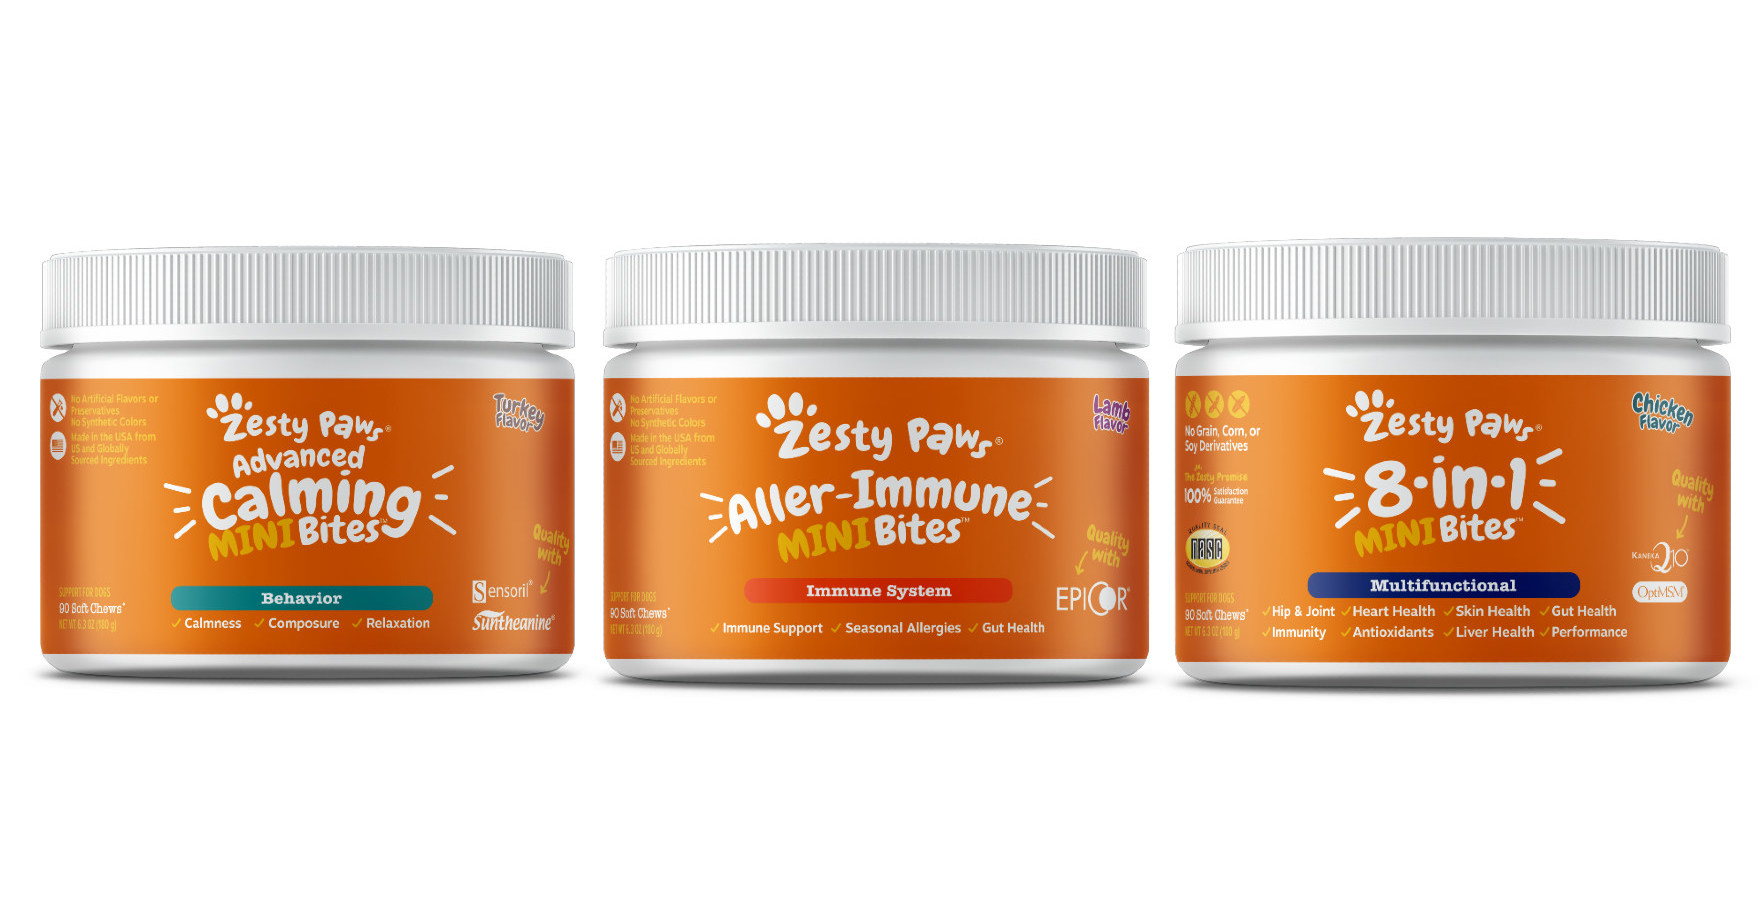 Zesty Paws launches new line of functional dog treats, 2020-09-23